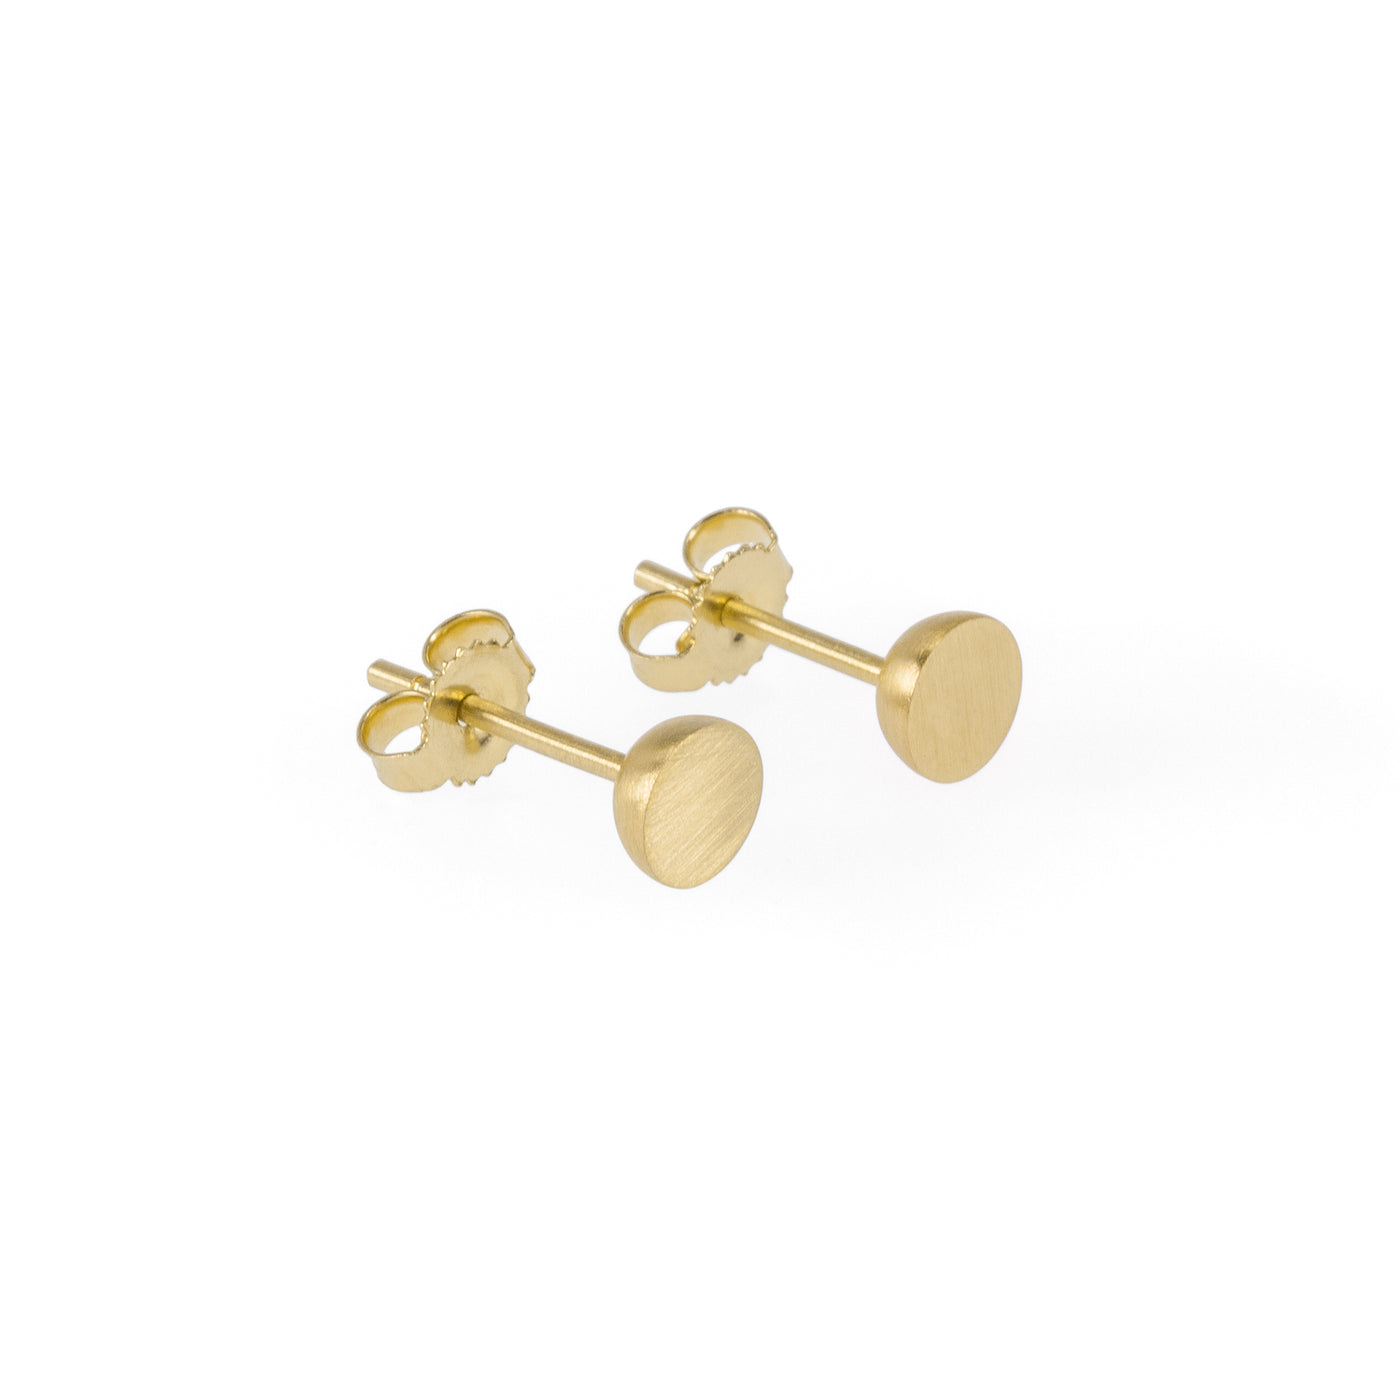 Ethical gold earrings. These minimalist 5mm Hemisphere Studs are handmade in Cape Town in recycled gold from e-waste.